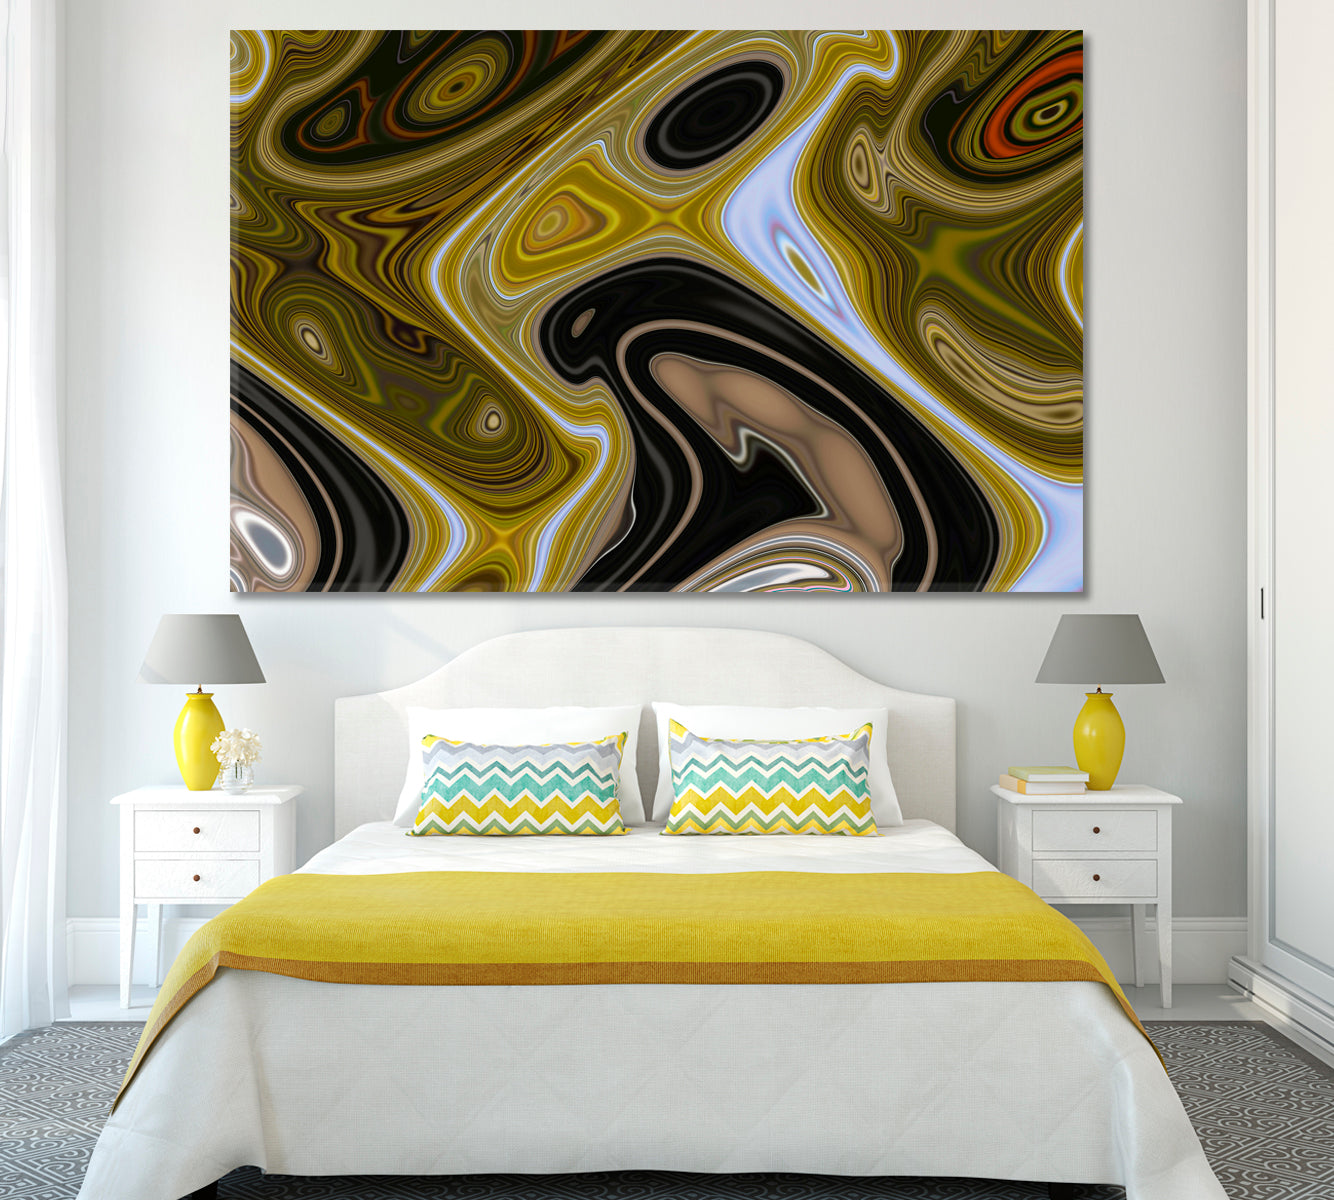 Abstract Psychedelic Swirl Pattern Canvas Print ArtLexy 1 Panel 24"x16" inches 